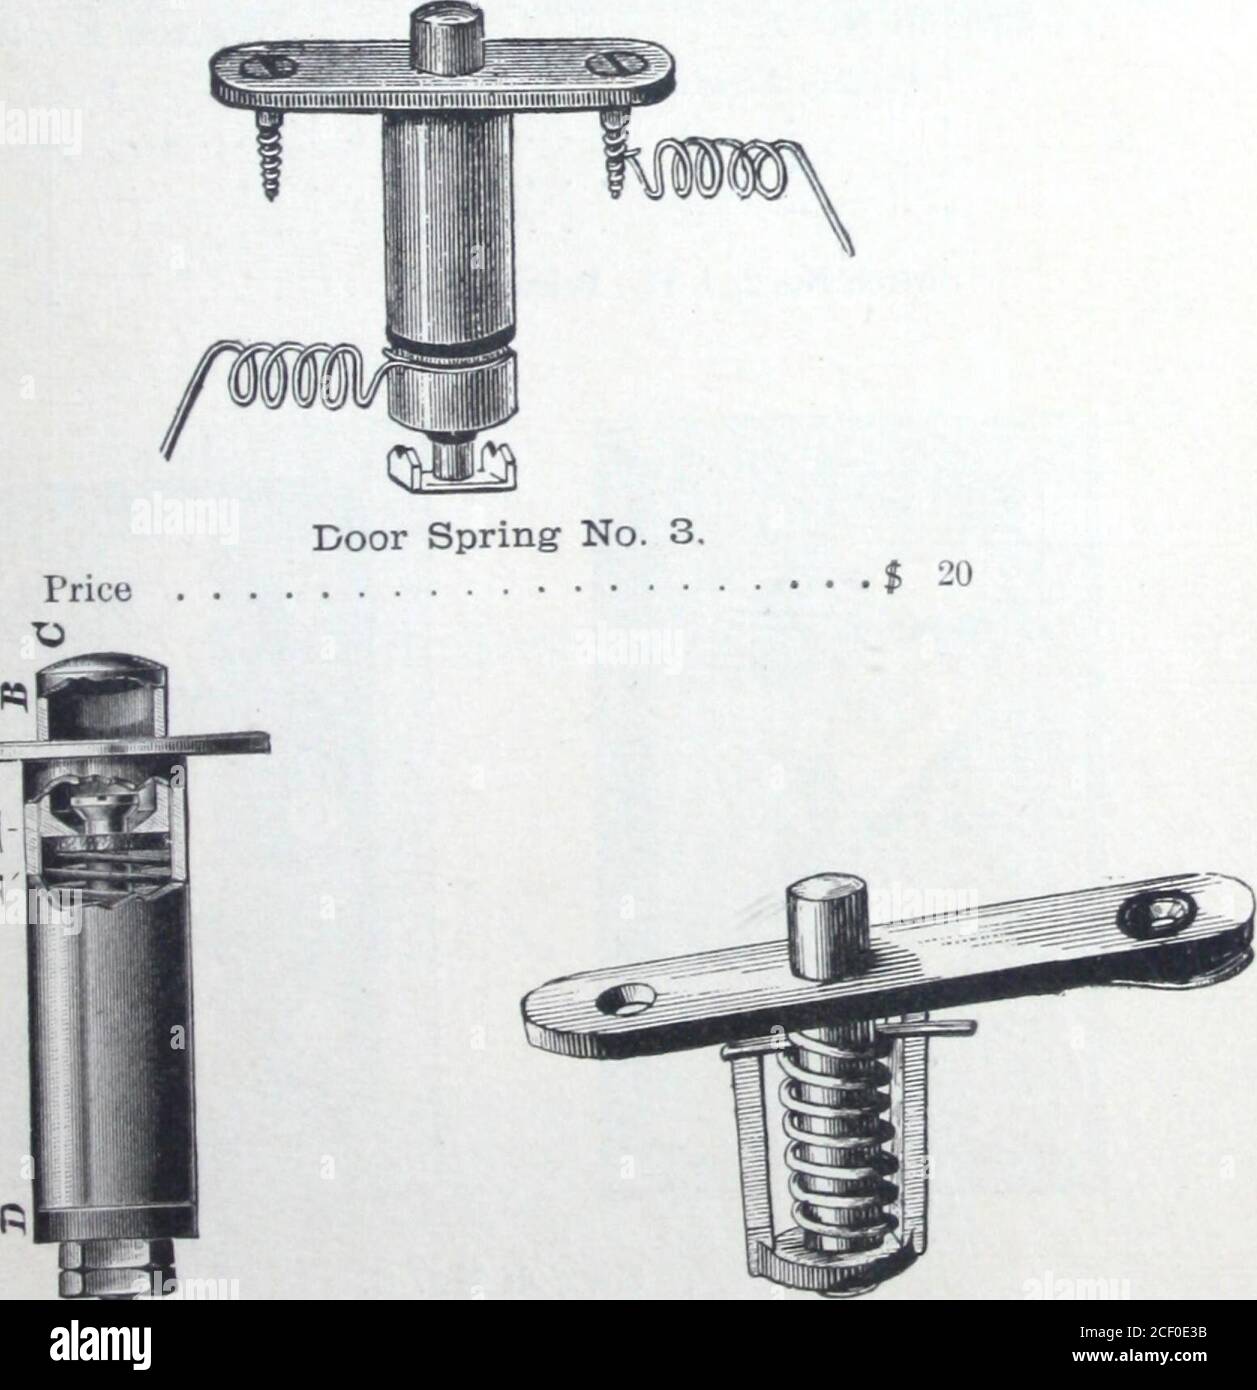 . Catalogue of O.D. Pierce & Co. manufacturers of and dealers in electrical supplies .... Single Window SpringPrice * - Improved Double Window SpringPrice • • $ 35. &lt; SI R 1 V Door Spring No. 2. Door Spring No. 1.Price $ 25 Price • • $ -0 34 O. D. PIERCE & CO., PHILADELPHIA, PA. BELL SWITCHES. Stock Photo